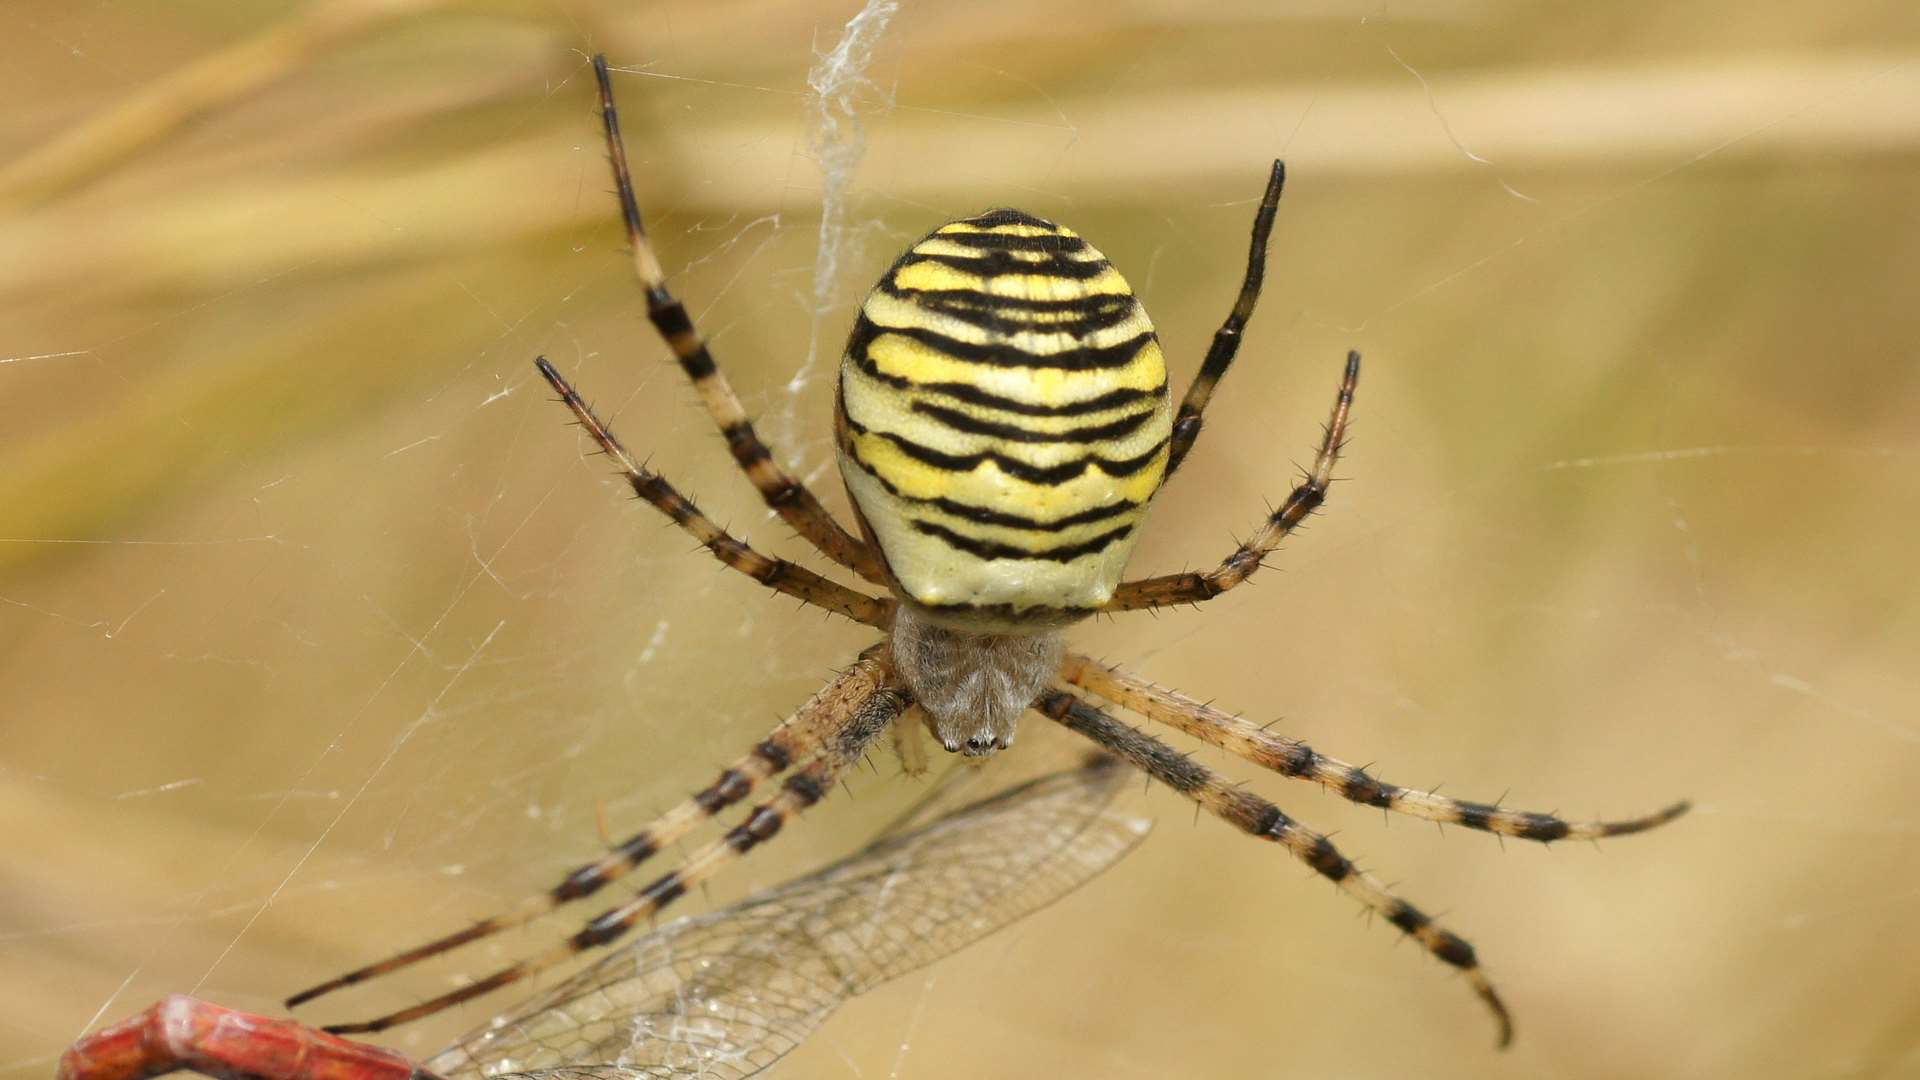 The Wasp Spider is the largest in the UK